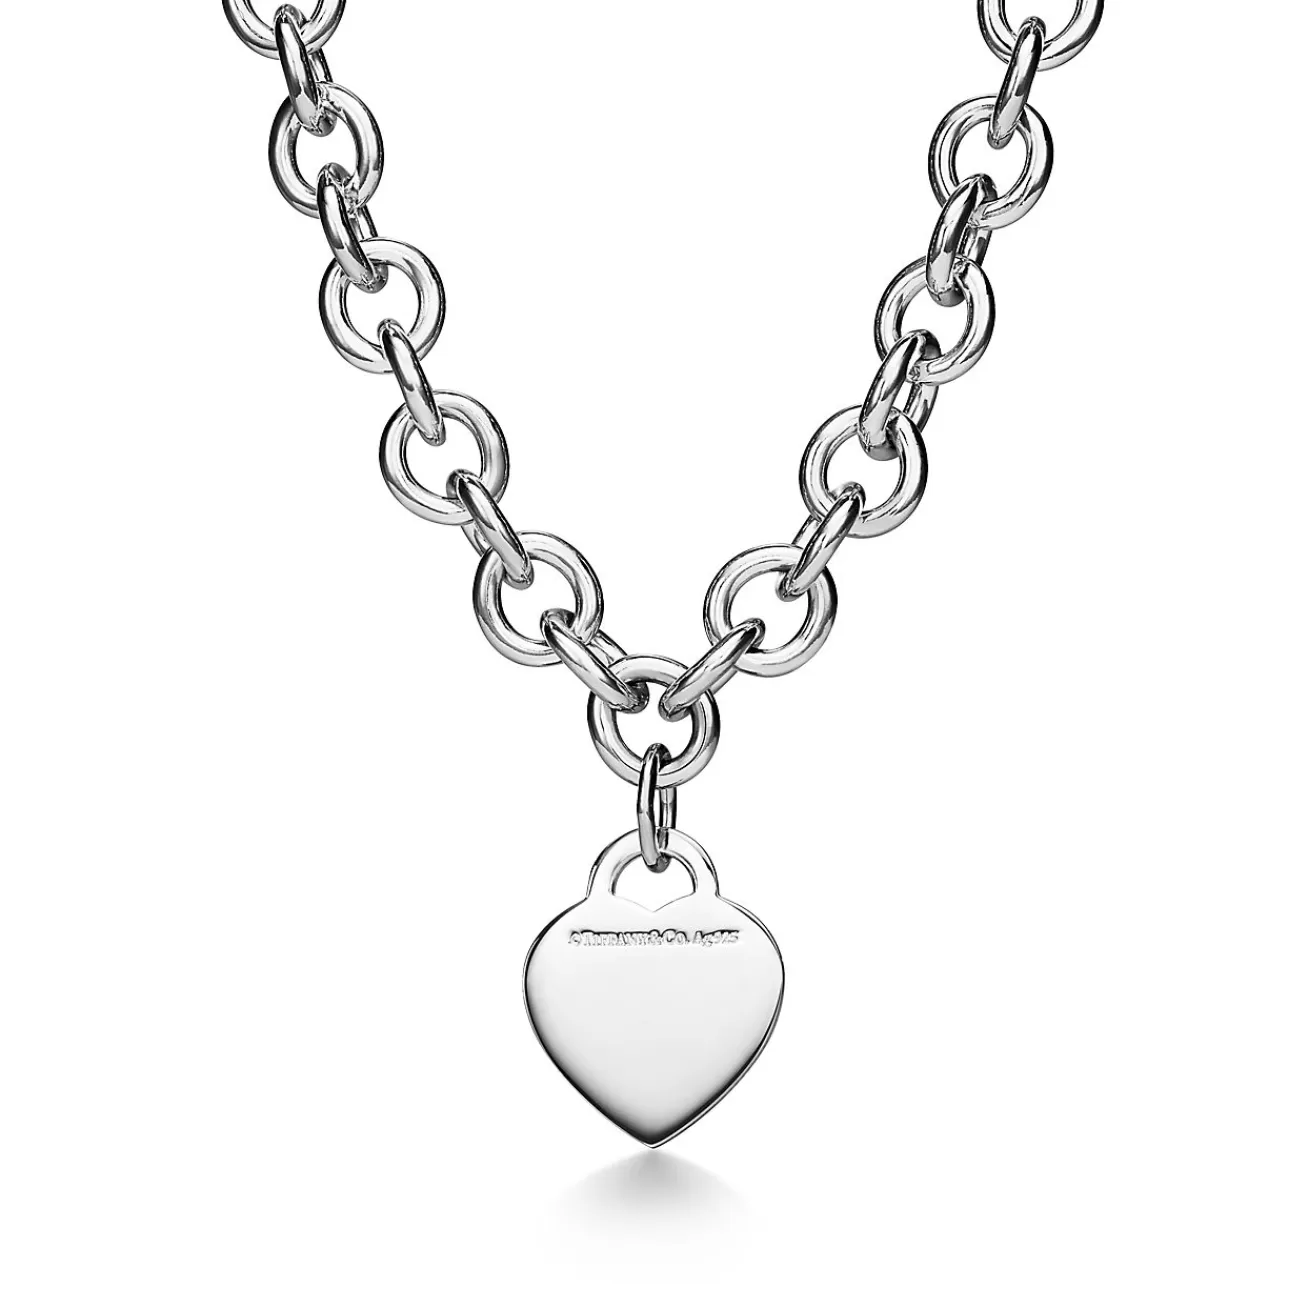 Tiffany & Co. Return to Tiffany® Heart Tag Necklace in Silver with a Diamond, Medium | ^ Necklaces & Pendants | Sterling Silver Jewelry